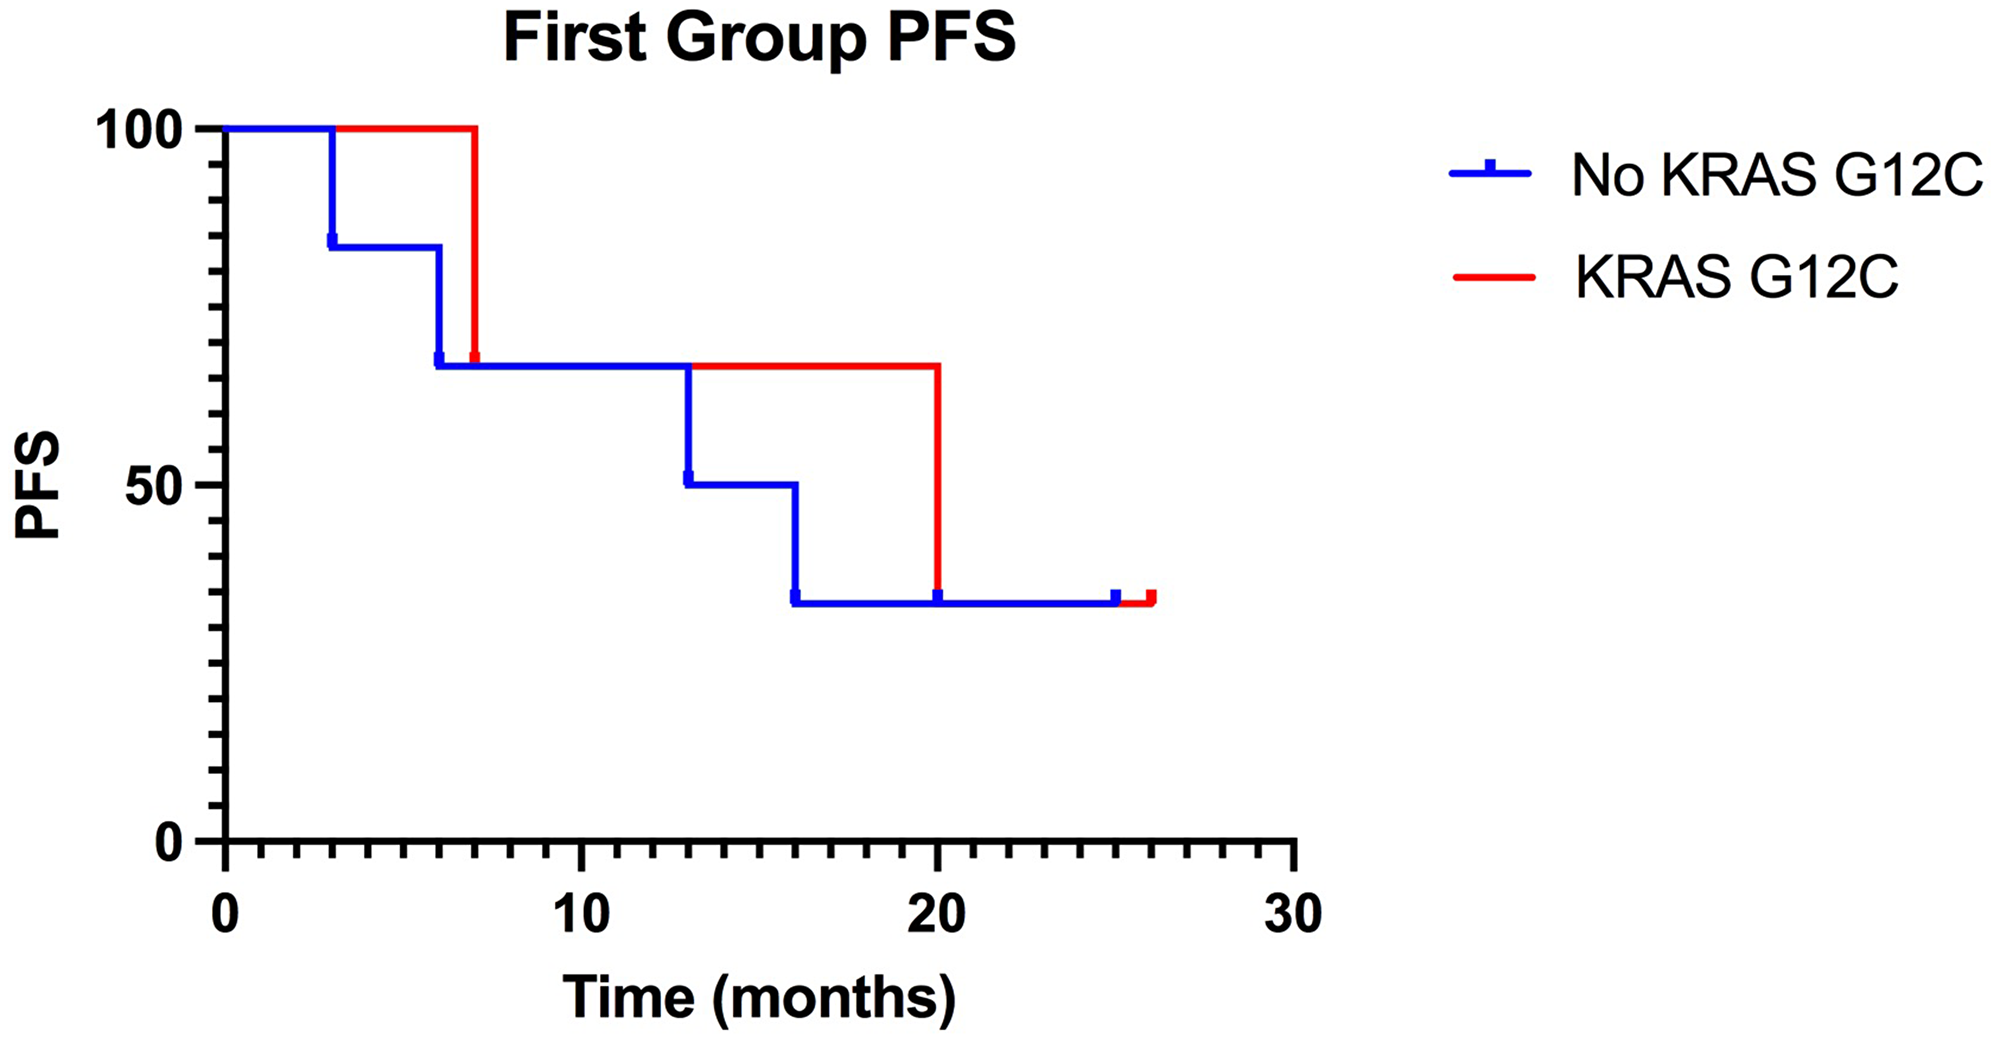 Kaplan-Meier of PFS in the first group, treated with ICIs in first-line: KRAS-G12C mutated patients have a median PFS of 20 months compared to 14,5 months PFS of non-KRAS-G12C mutated patients.